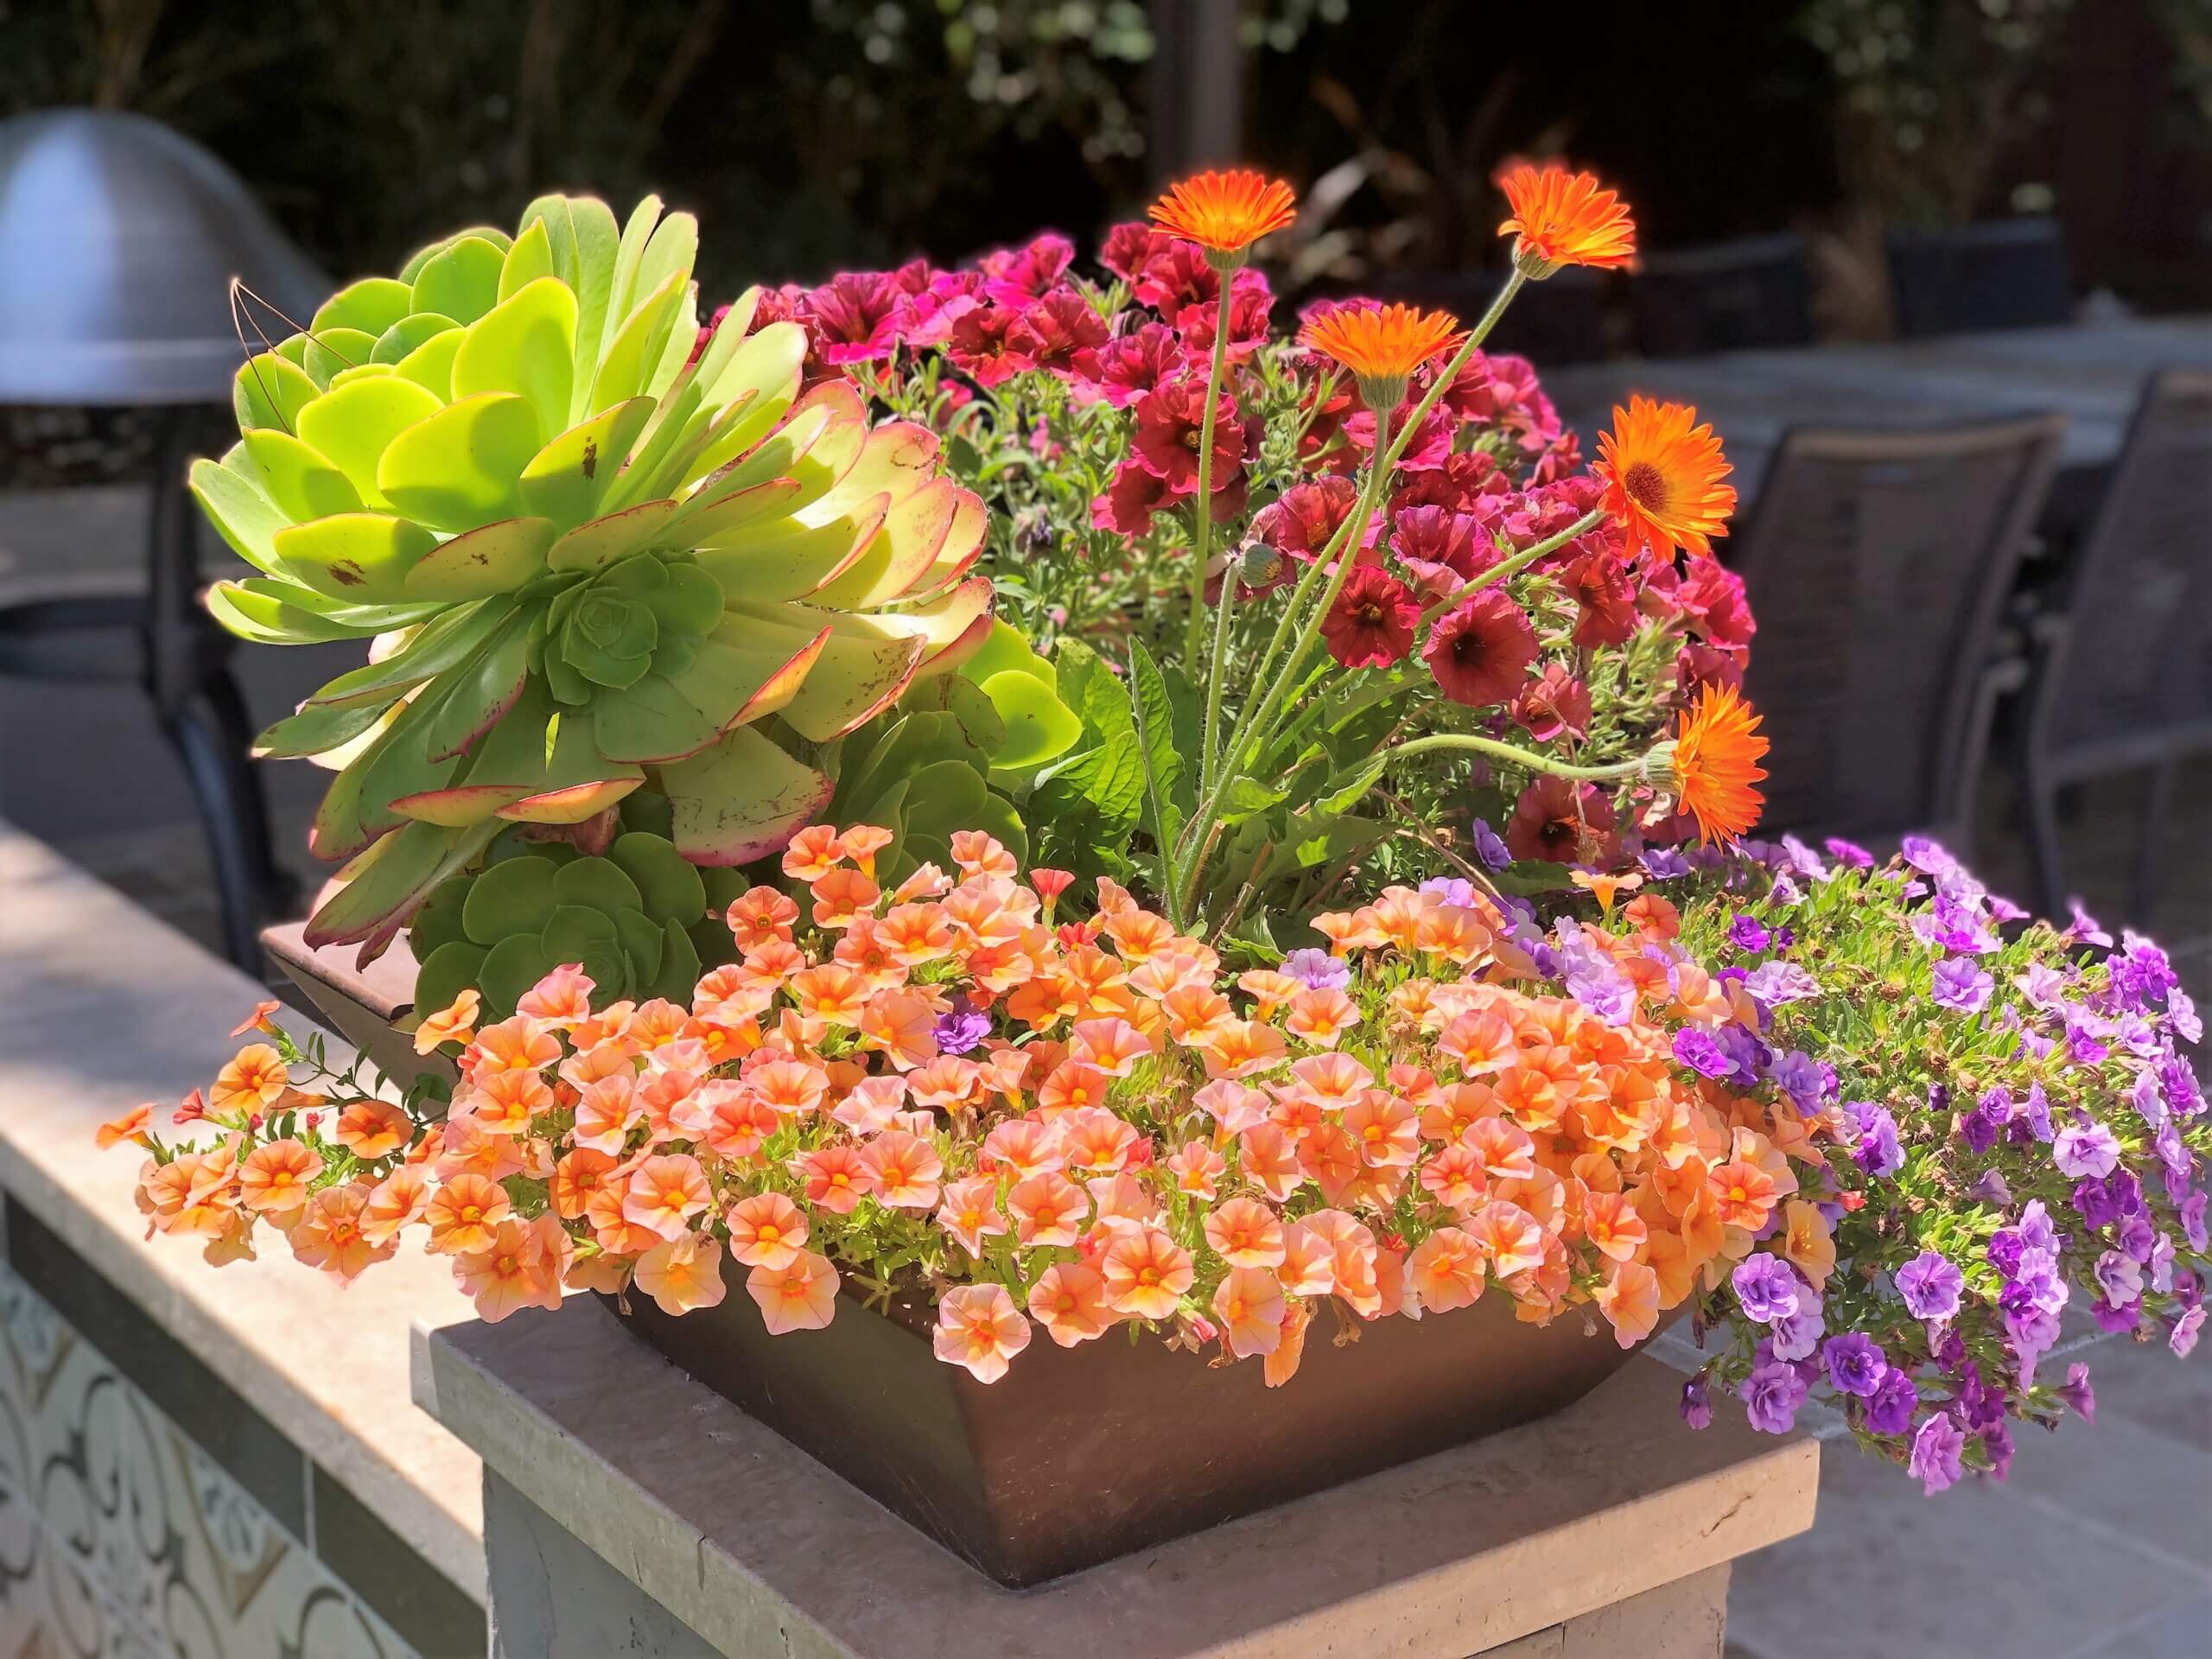 Succulent and bright flowers in a pot